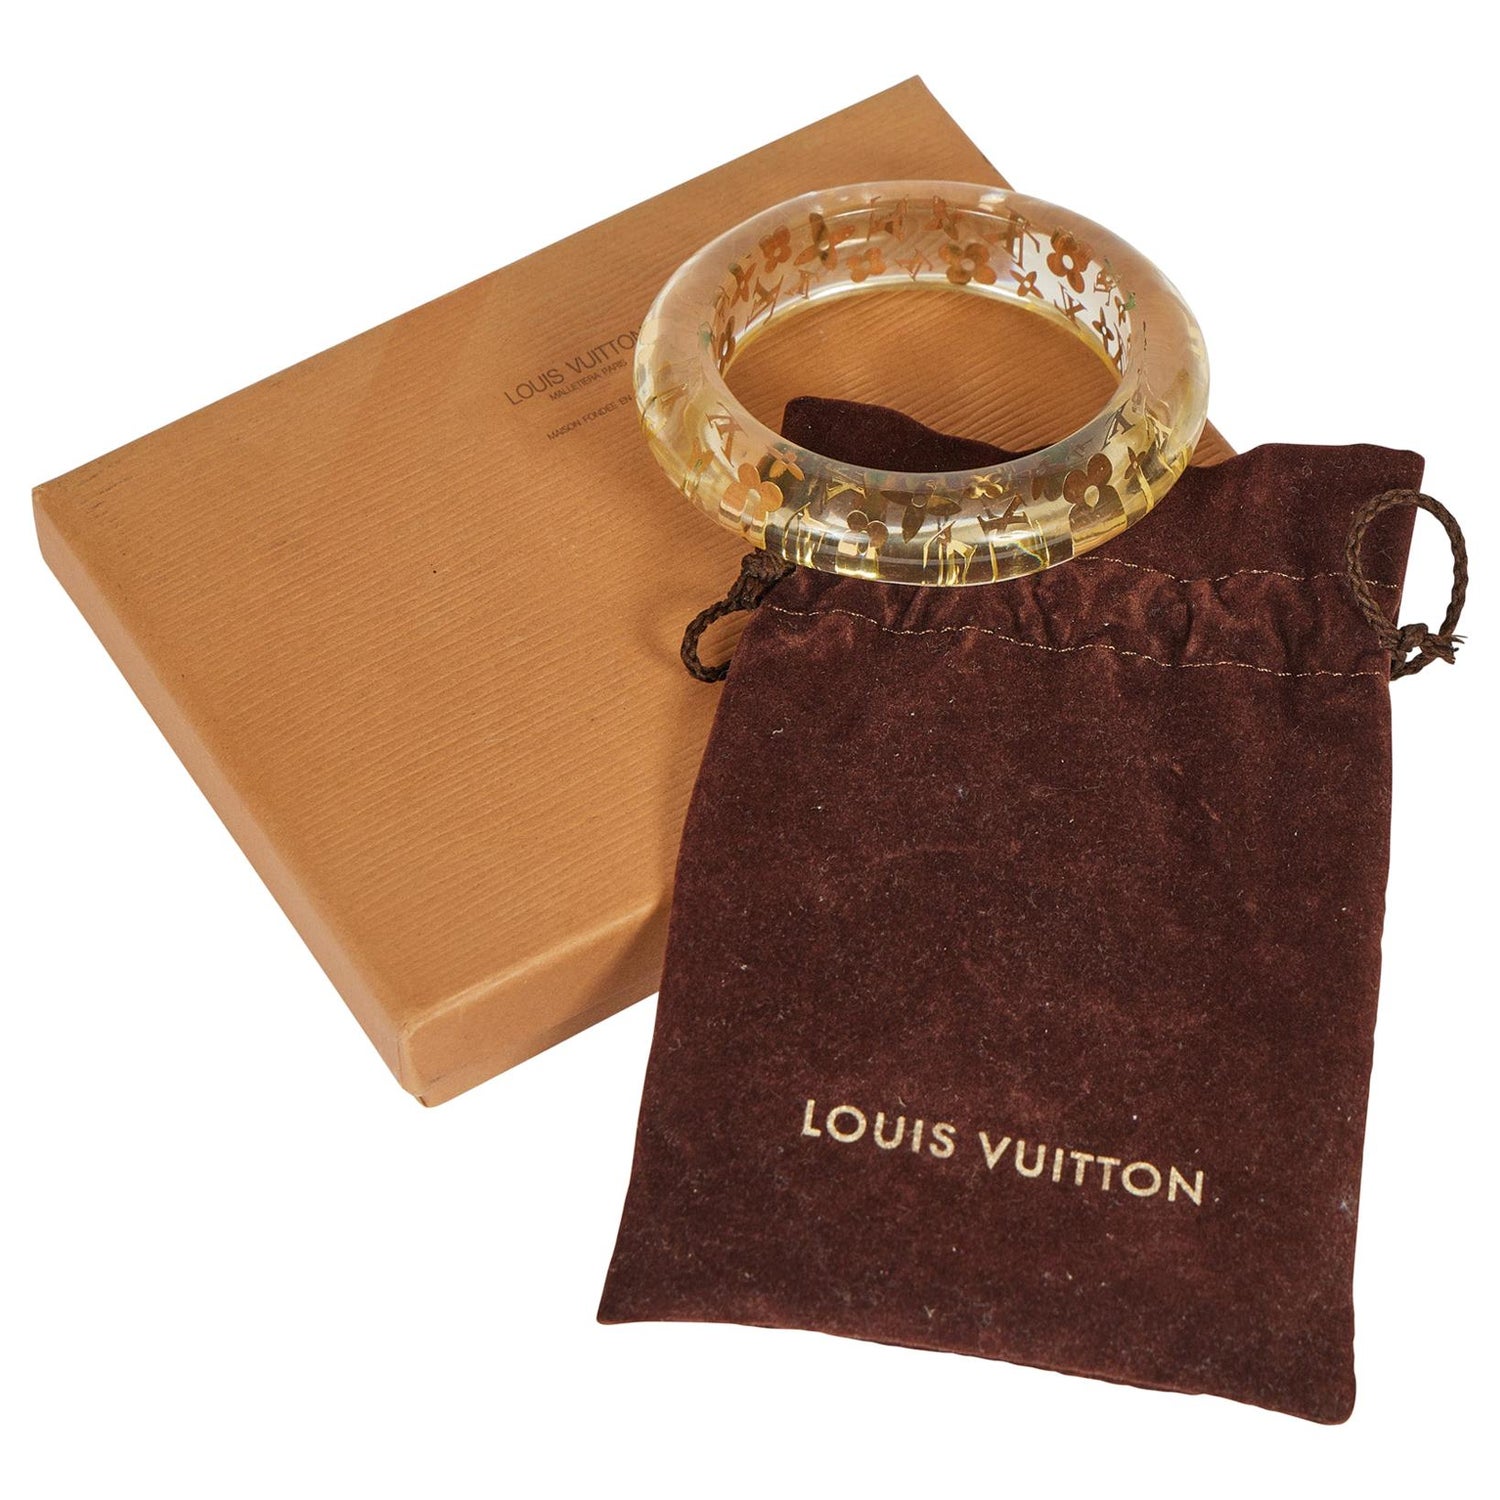 A LOUIS VUITTON LUCITE AND GOLD LEAF RING, the bombe style clear coloured  ring inset with gold leaf details including initials LV and flower head  details. In Louis Vuitton box. Ring size